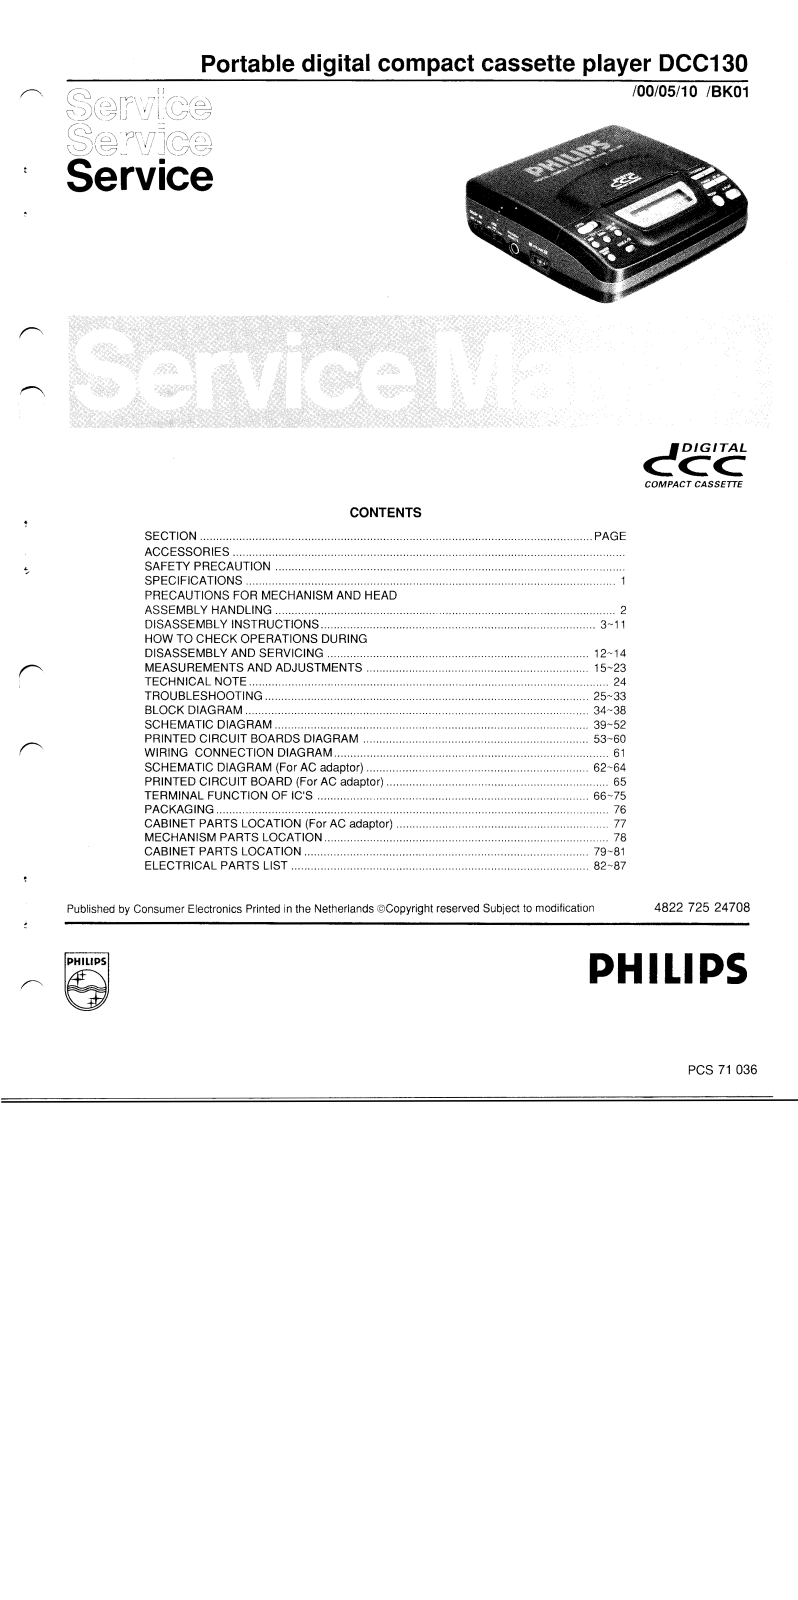 Philips DCC-130 Service manual